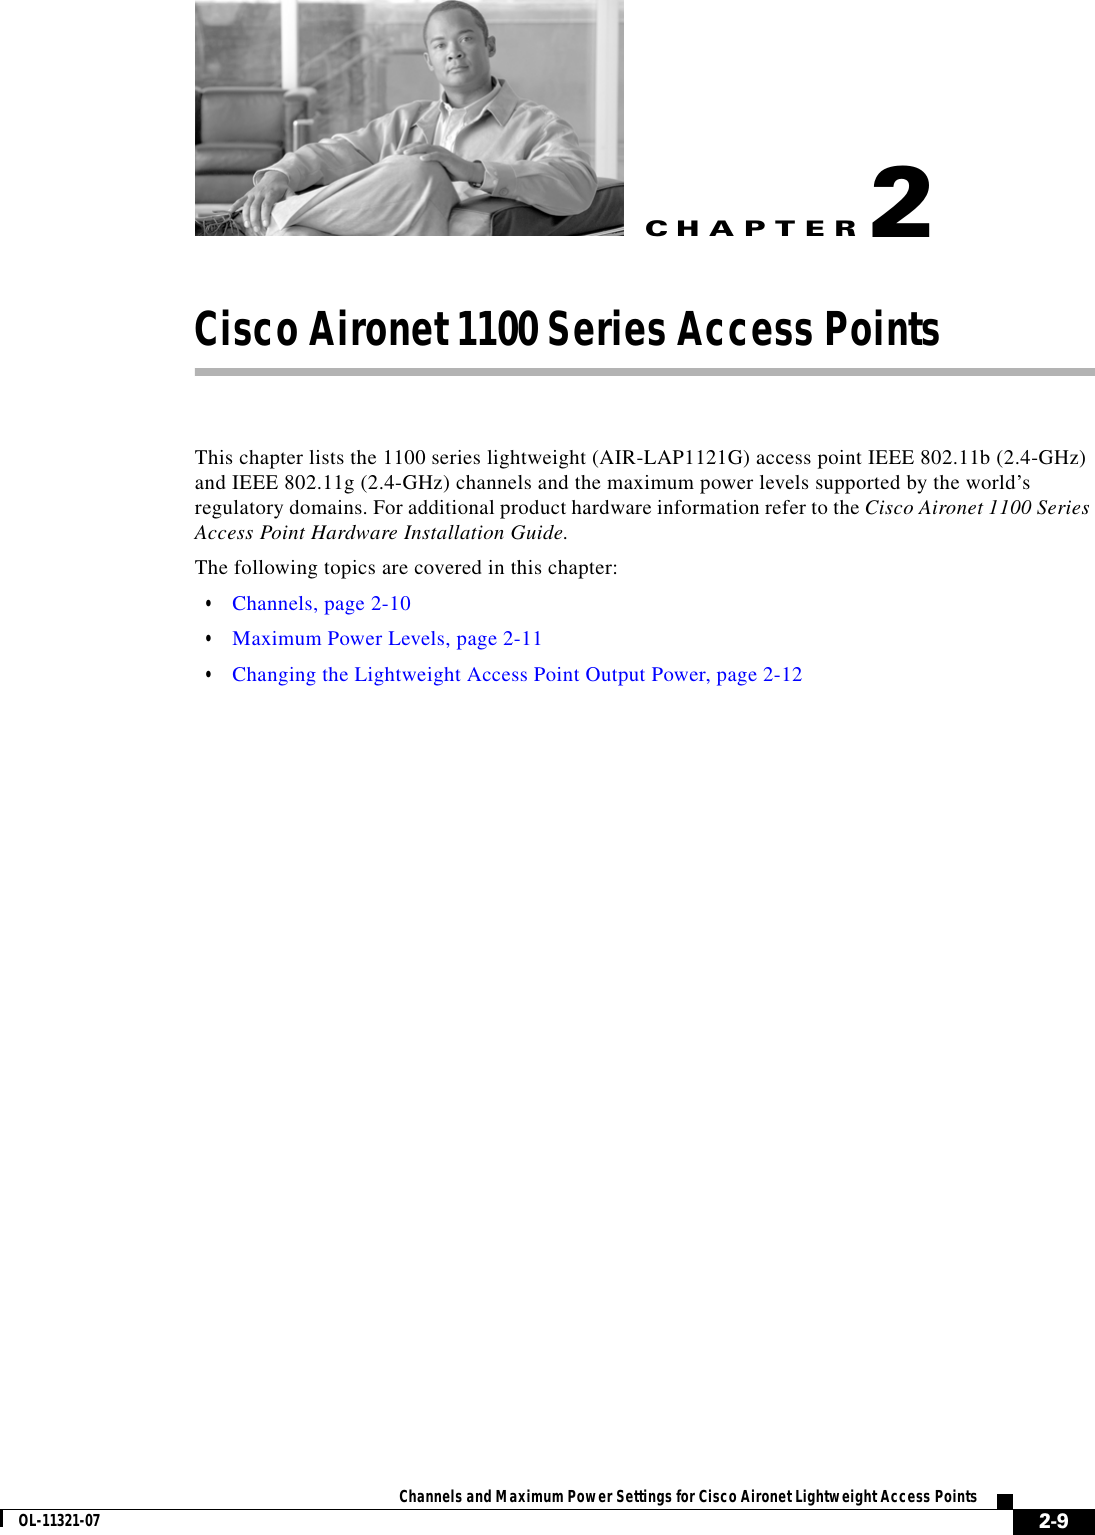 CHAPTER 2-9Channels and Maximum Power Settings for Cisco Aironet Lightweight Access PointsOL-11321-072Cisco Aironet 1100 Series Access Points This chapter lists the 1100 series lightweight (AIR-LAP1121G) access point IEEE 802.11b (2.4-GHz) and IEEE 802.11g (2.4-GHz) channels and the maximum power levels supported by the world’s regulatory domains. For additional product hardware information refer to the Cisco Aironet 1100 Series Access Point Hardware Installation Guide.The following topics are covered in this chapter:  • Channels, page 2-10  • Maximum Power Levels, page 2-11  • Changing the Lightweight Access Point Output Power, page 2-12